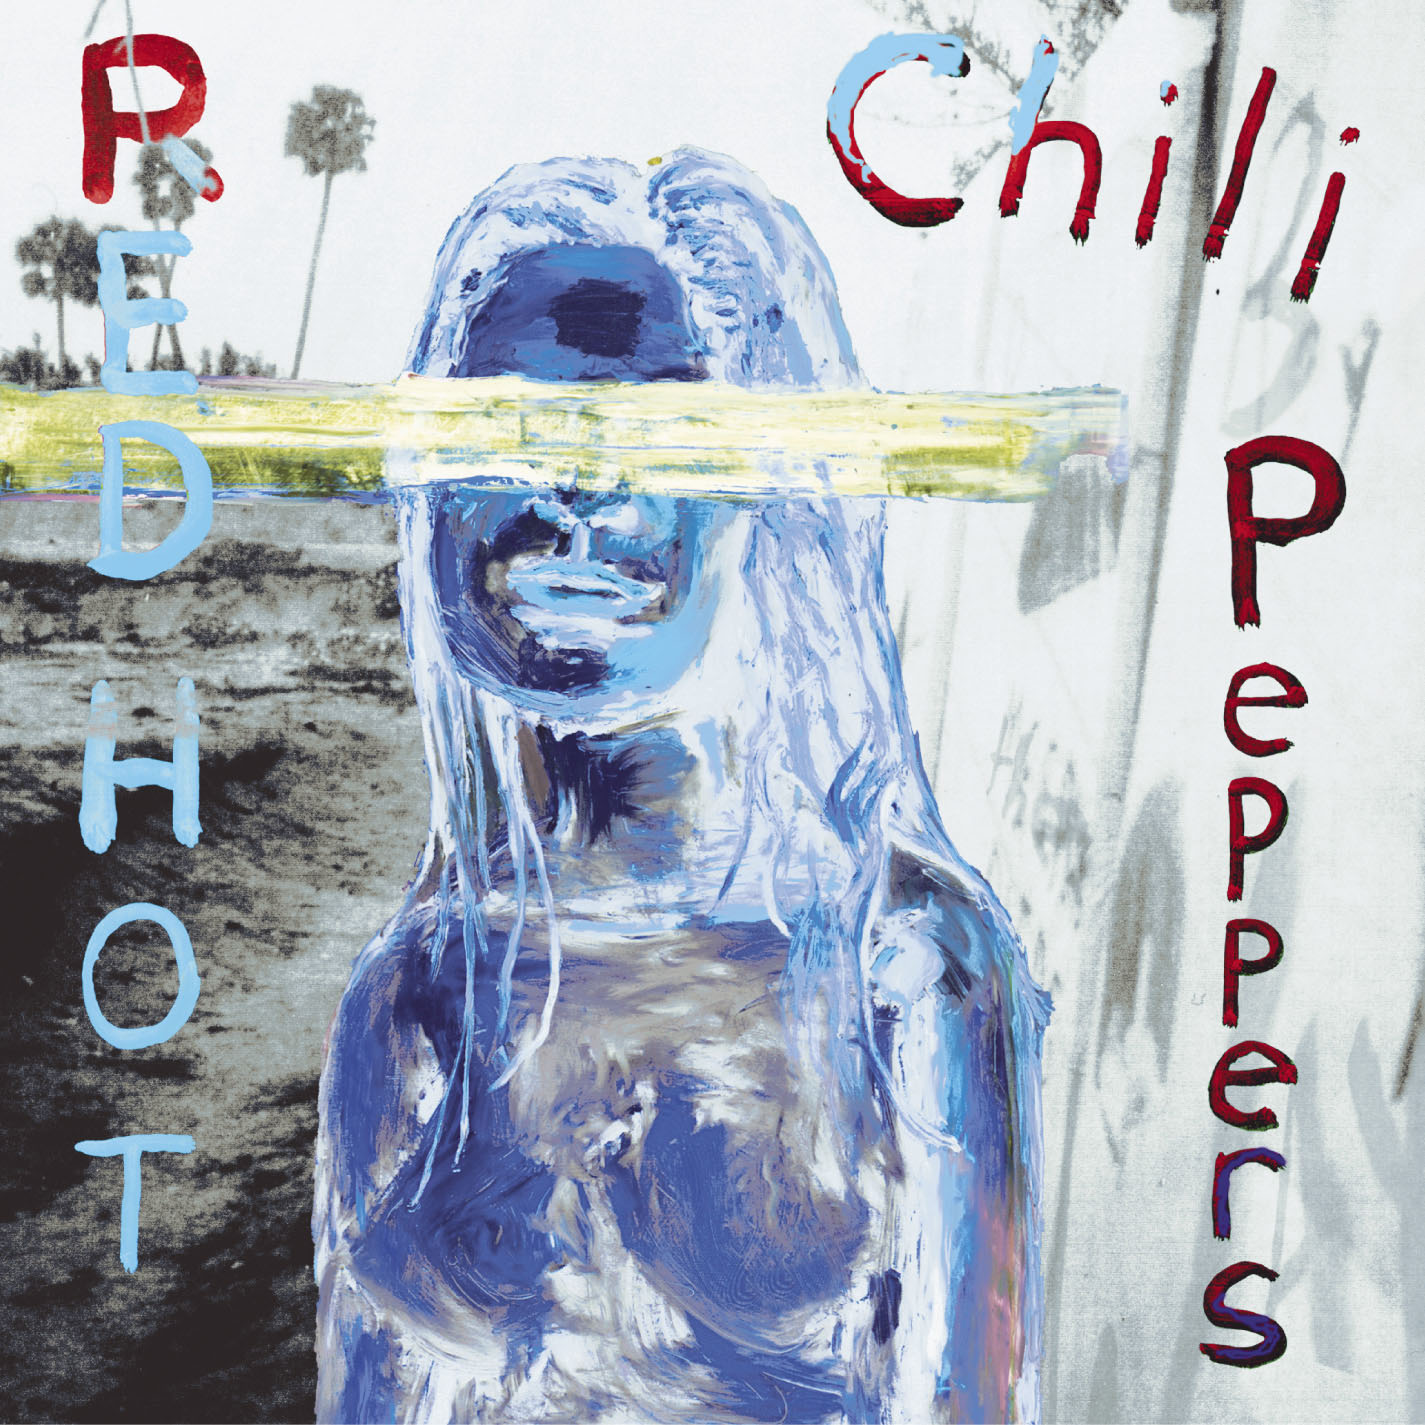 Red Hot Chili Peppers-By The Way-(9362 42458-2)-CDM-FLAC-2002-WRE Download